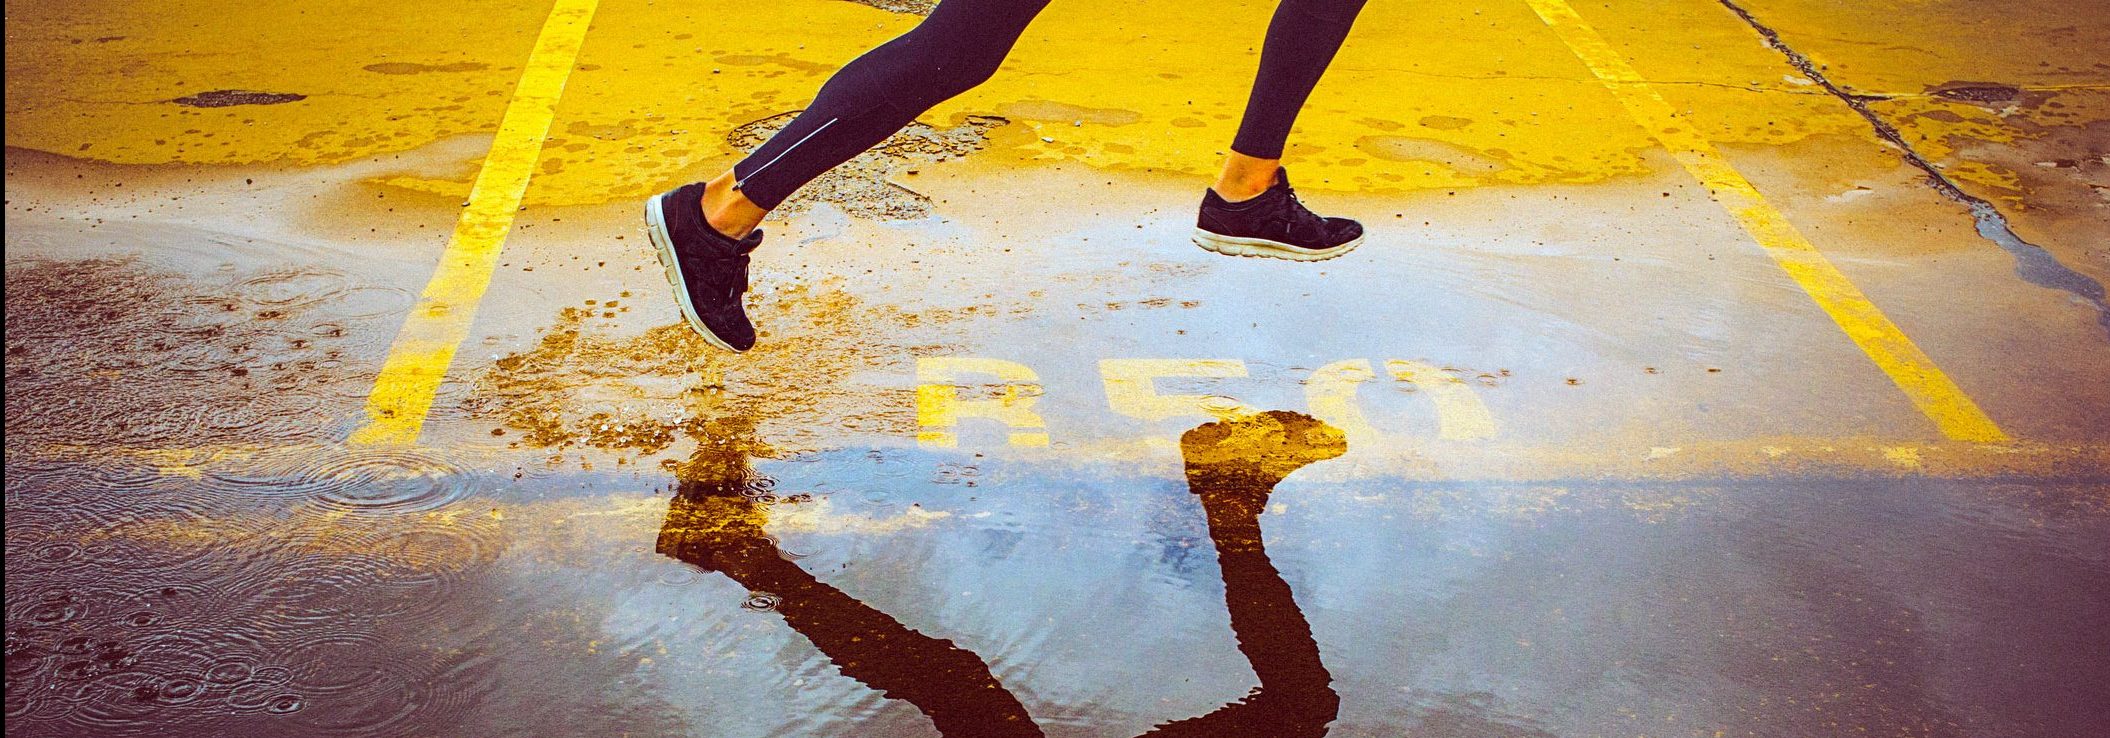 Young person running over the yellow parking lot. Black sport clothing - sport shoes, running tights, and a jacket. High angle view of a runner's legs and its reflection in the water.